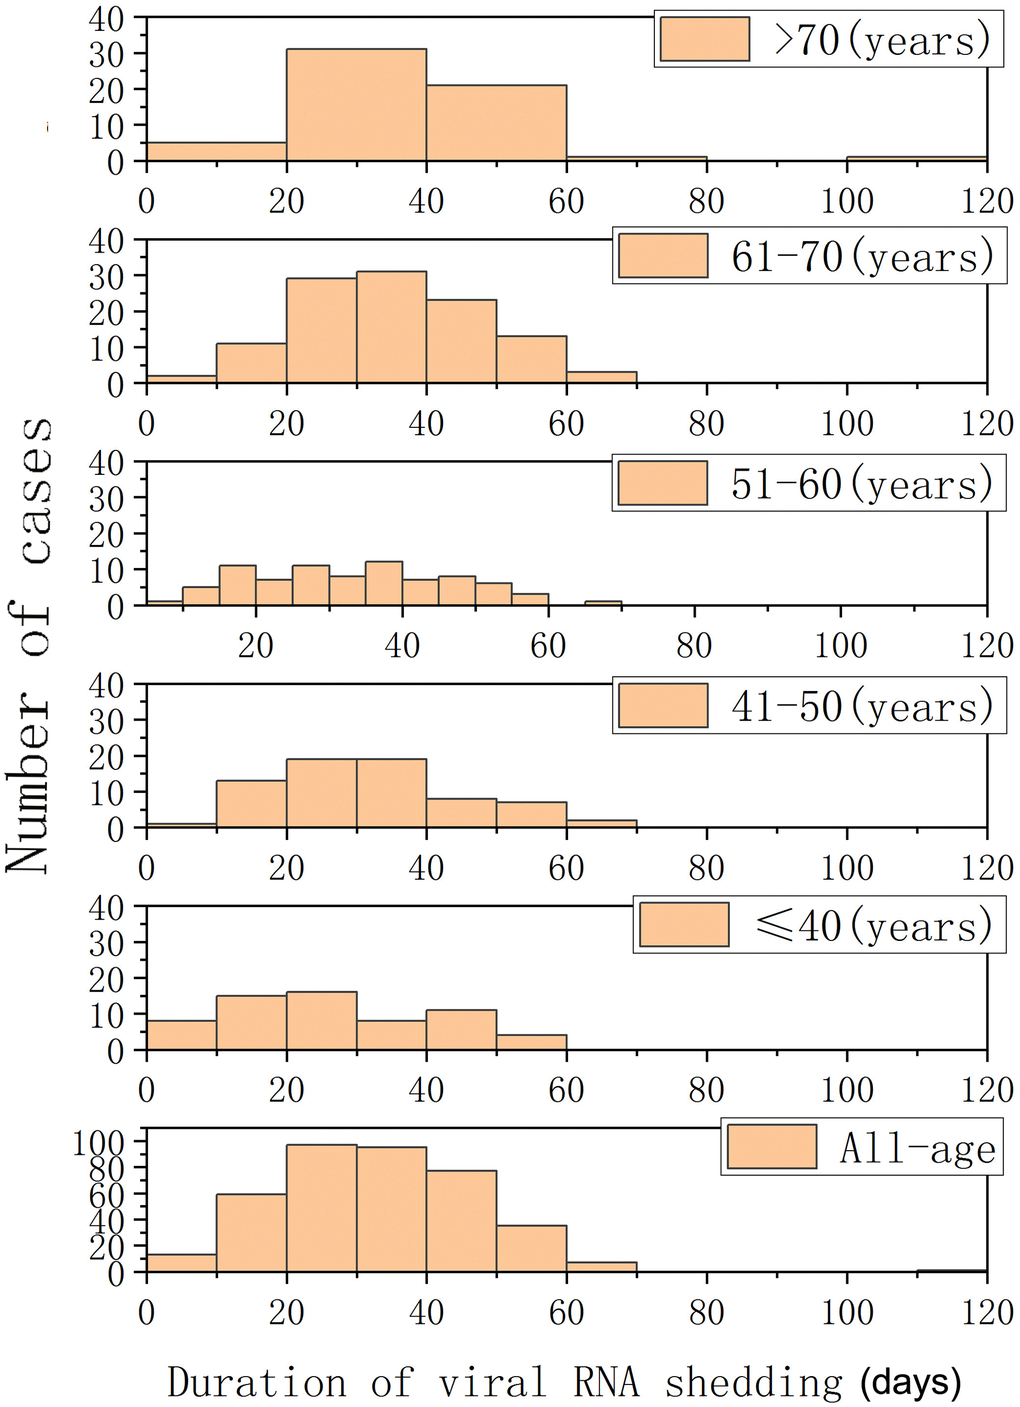 Histograms of periods of viral RNA shedding (days) in patients with COVID-19 and different age groups.